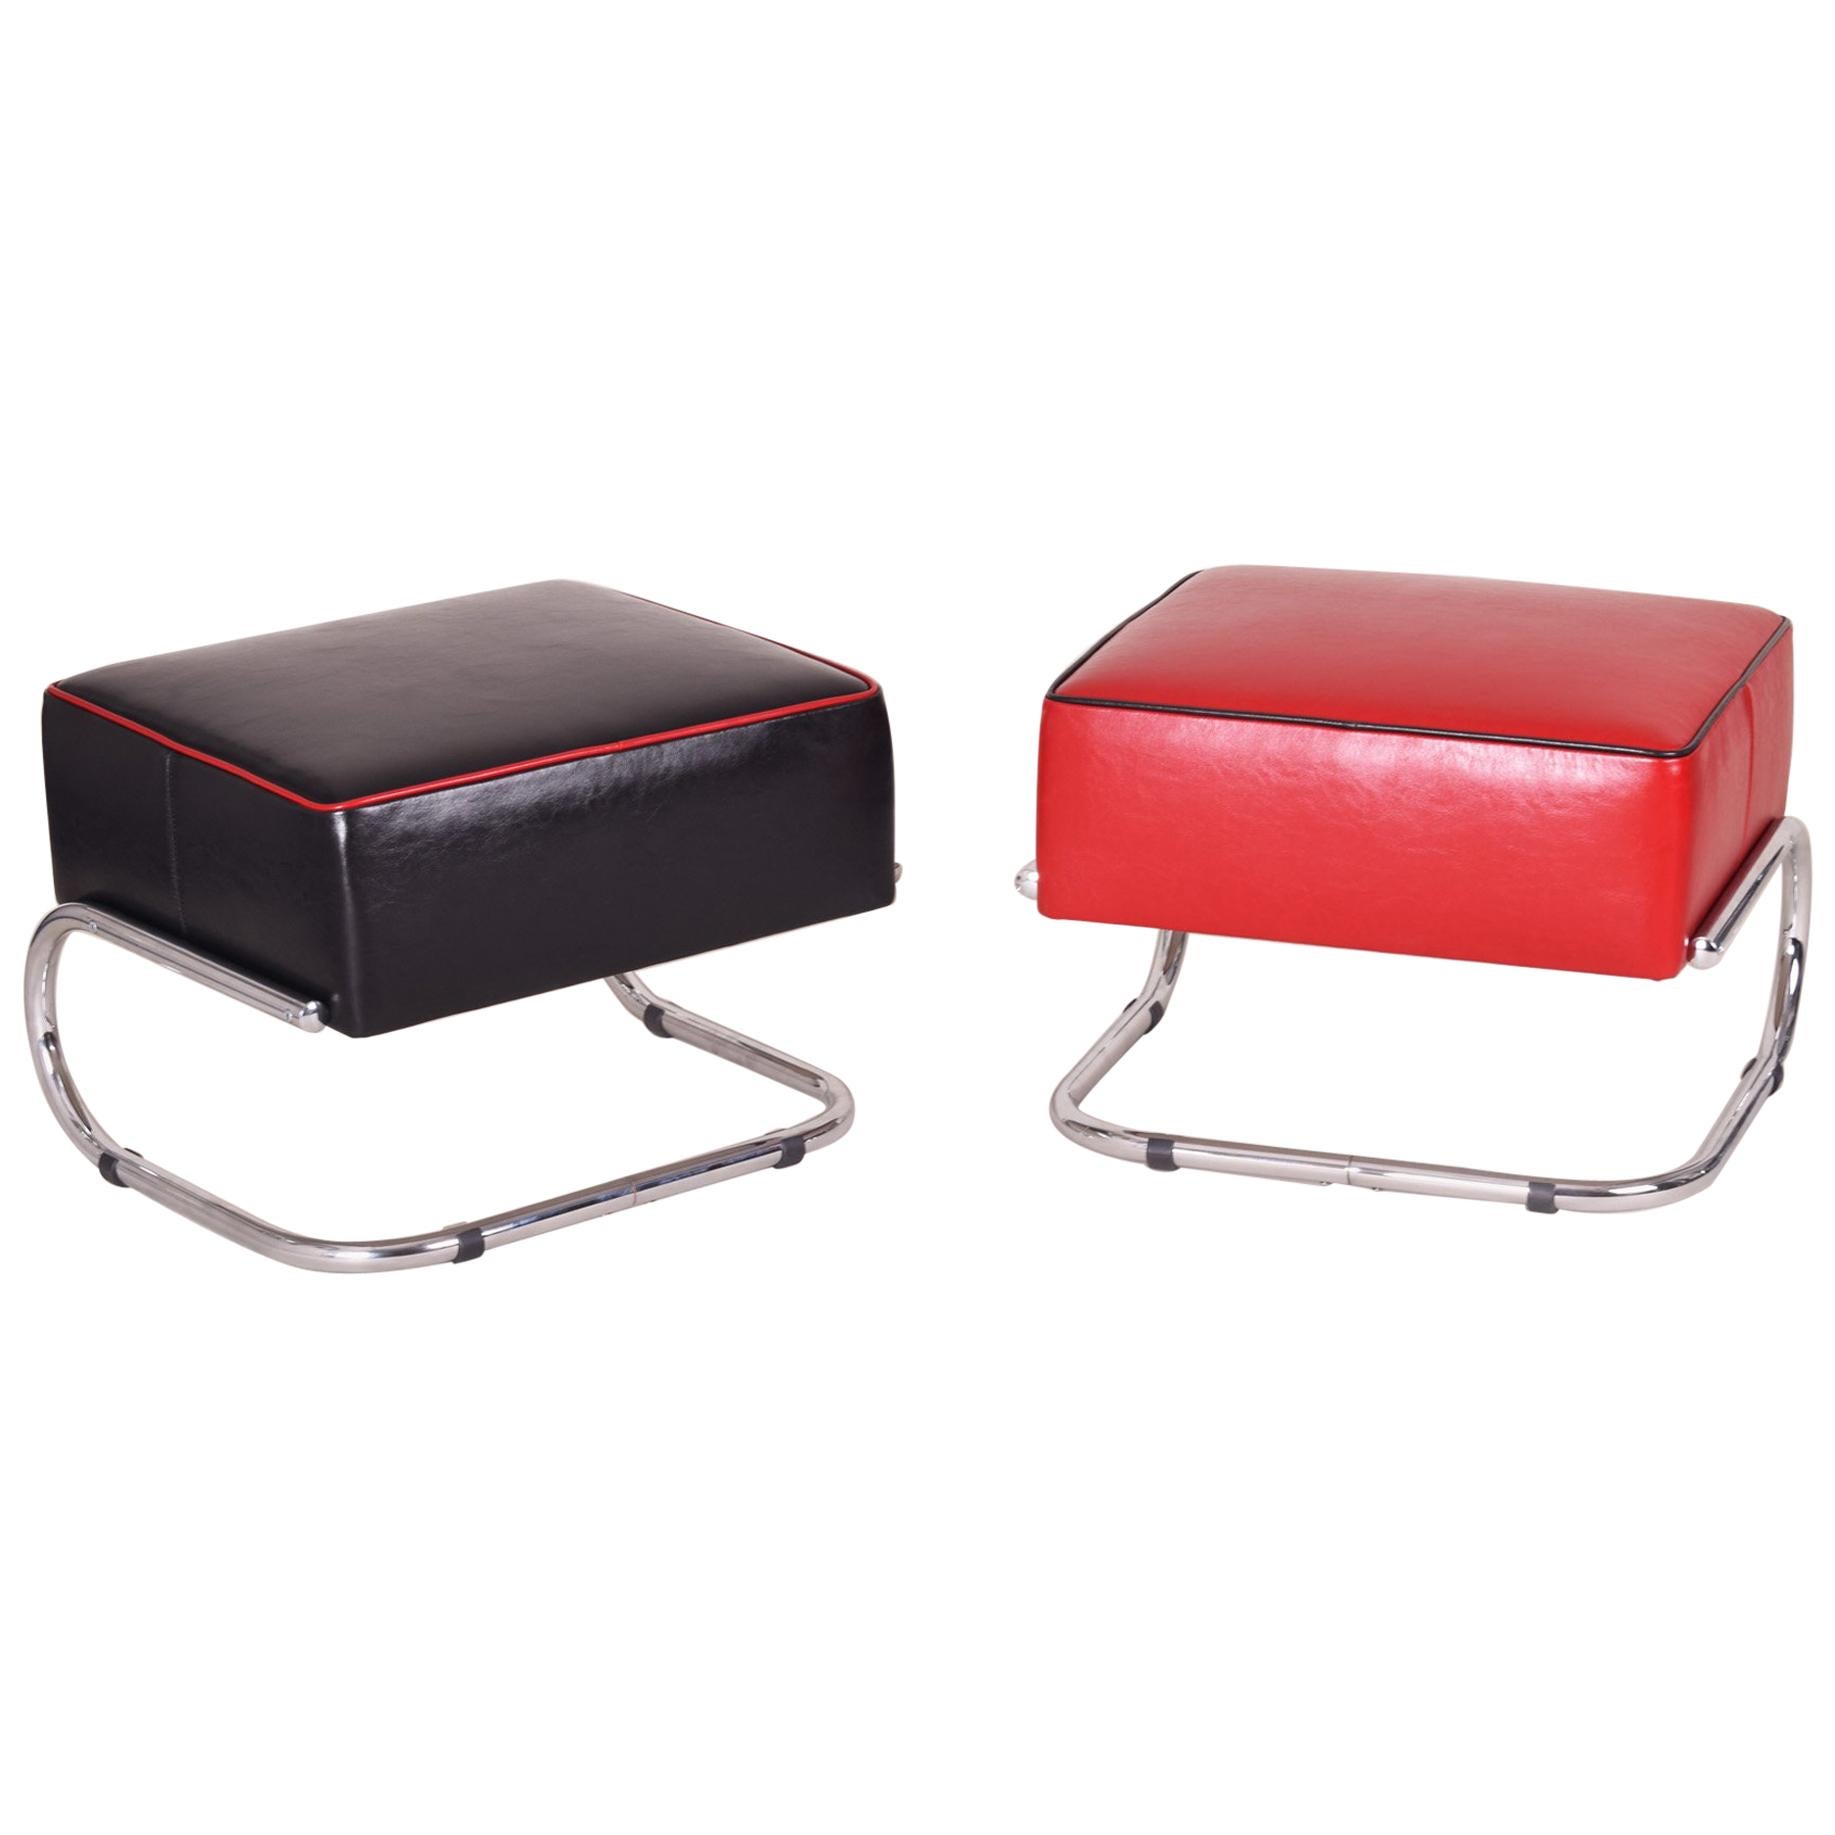 Pair of Modernist Tubular Steel Stools, Black and Red Leather, Chrome, 1930-1939 For Sale